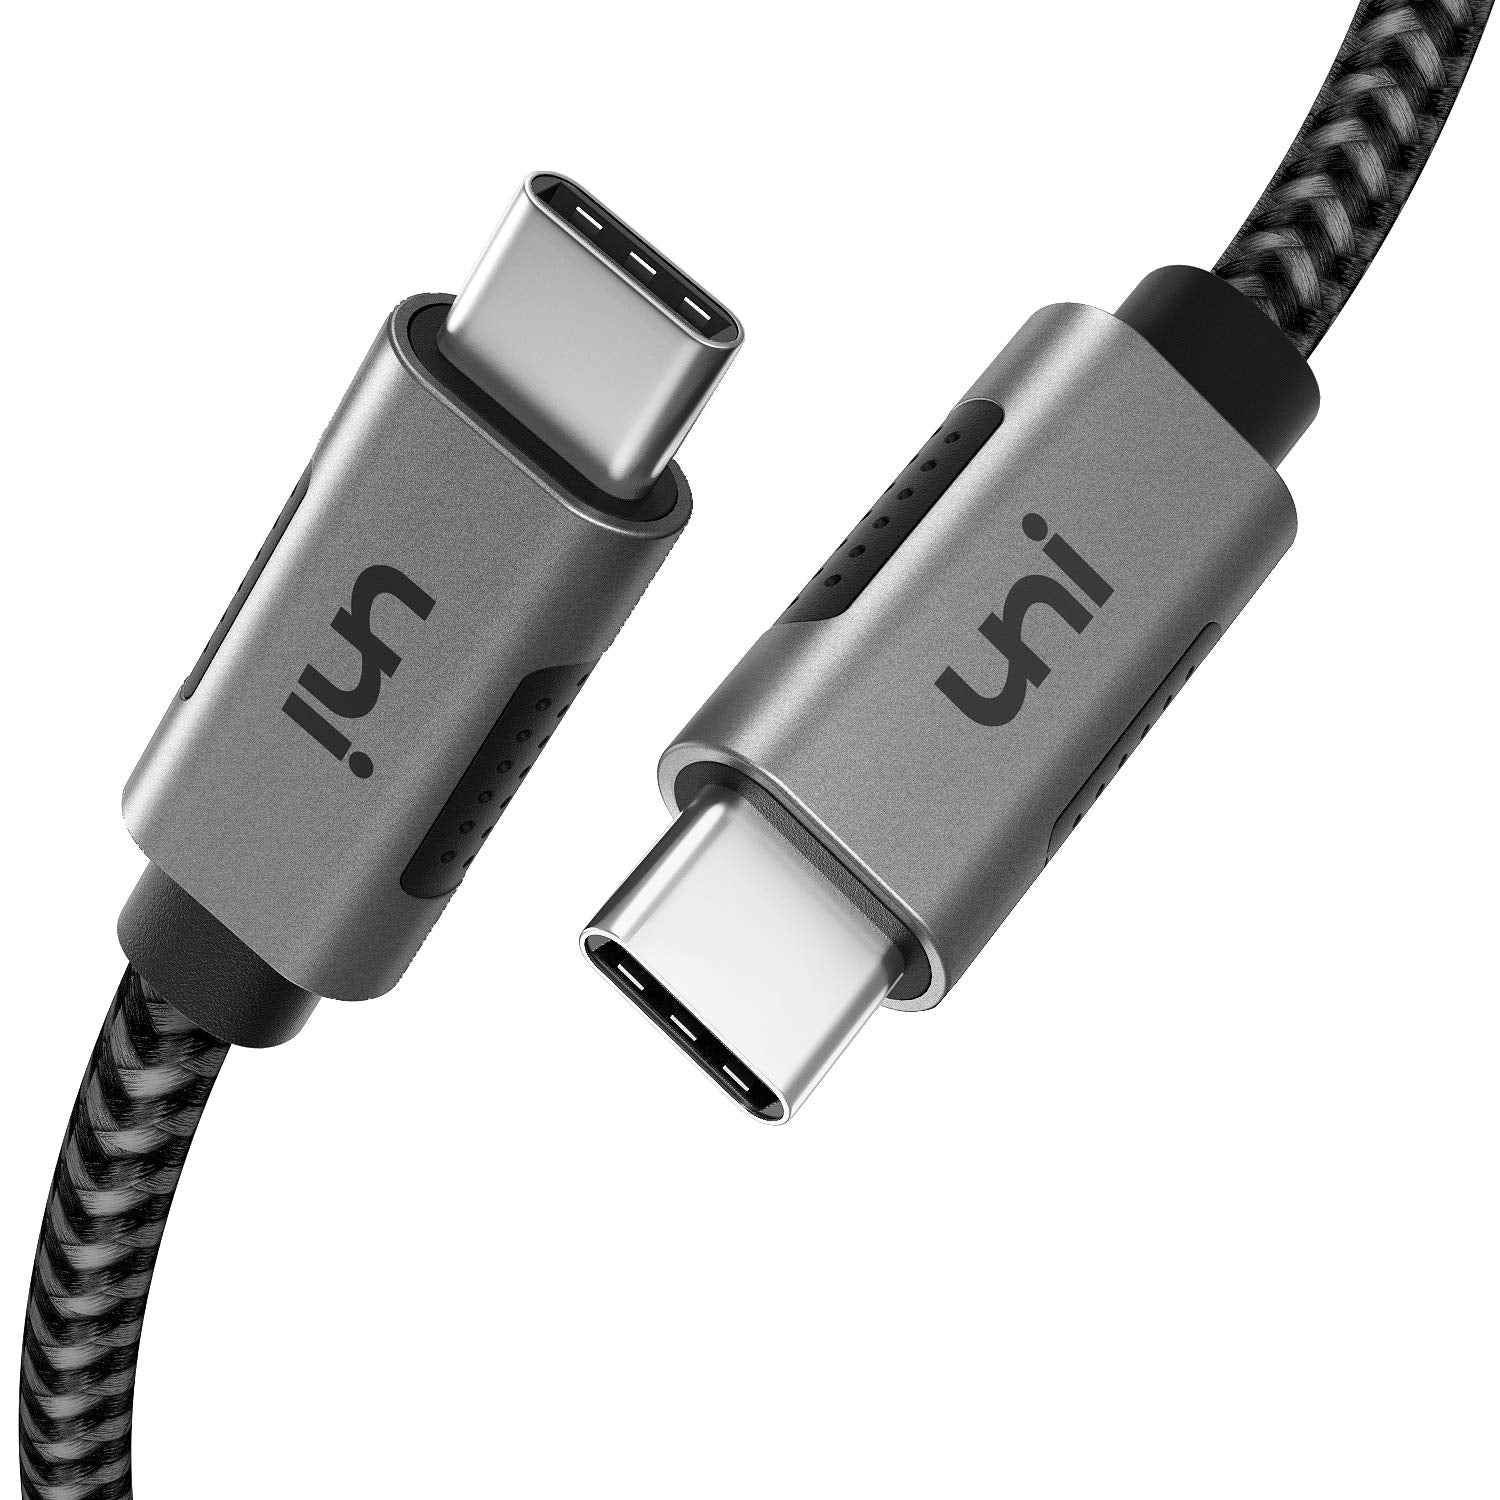 Chargeur iPhone Cable de charge Type C vers Lightning 1 - YaYi Business